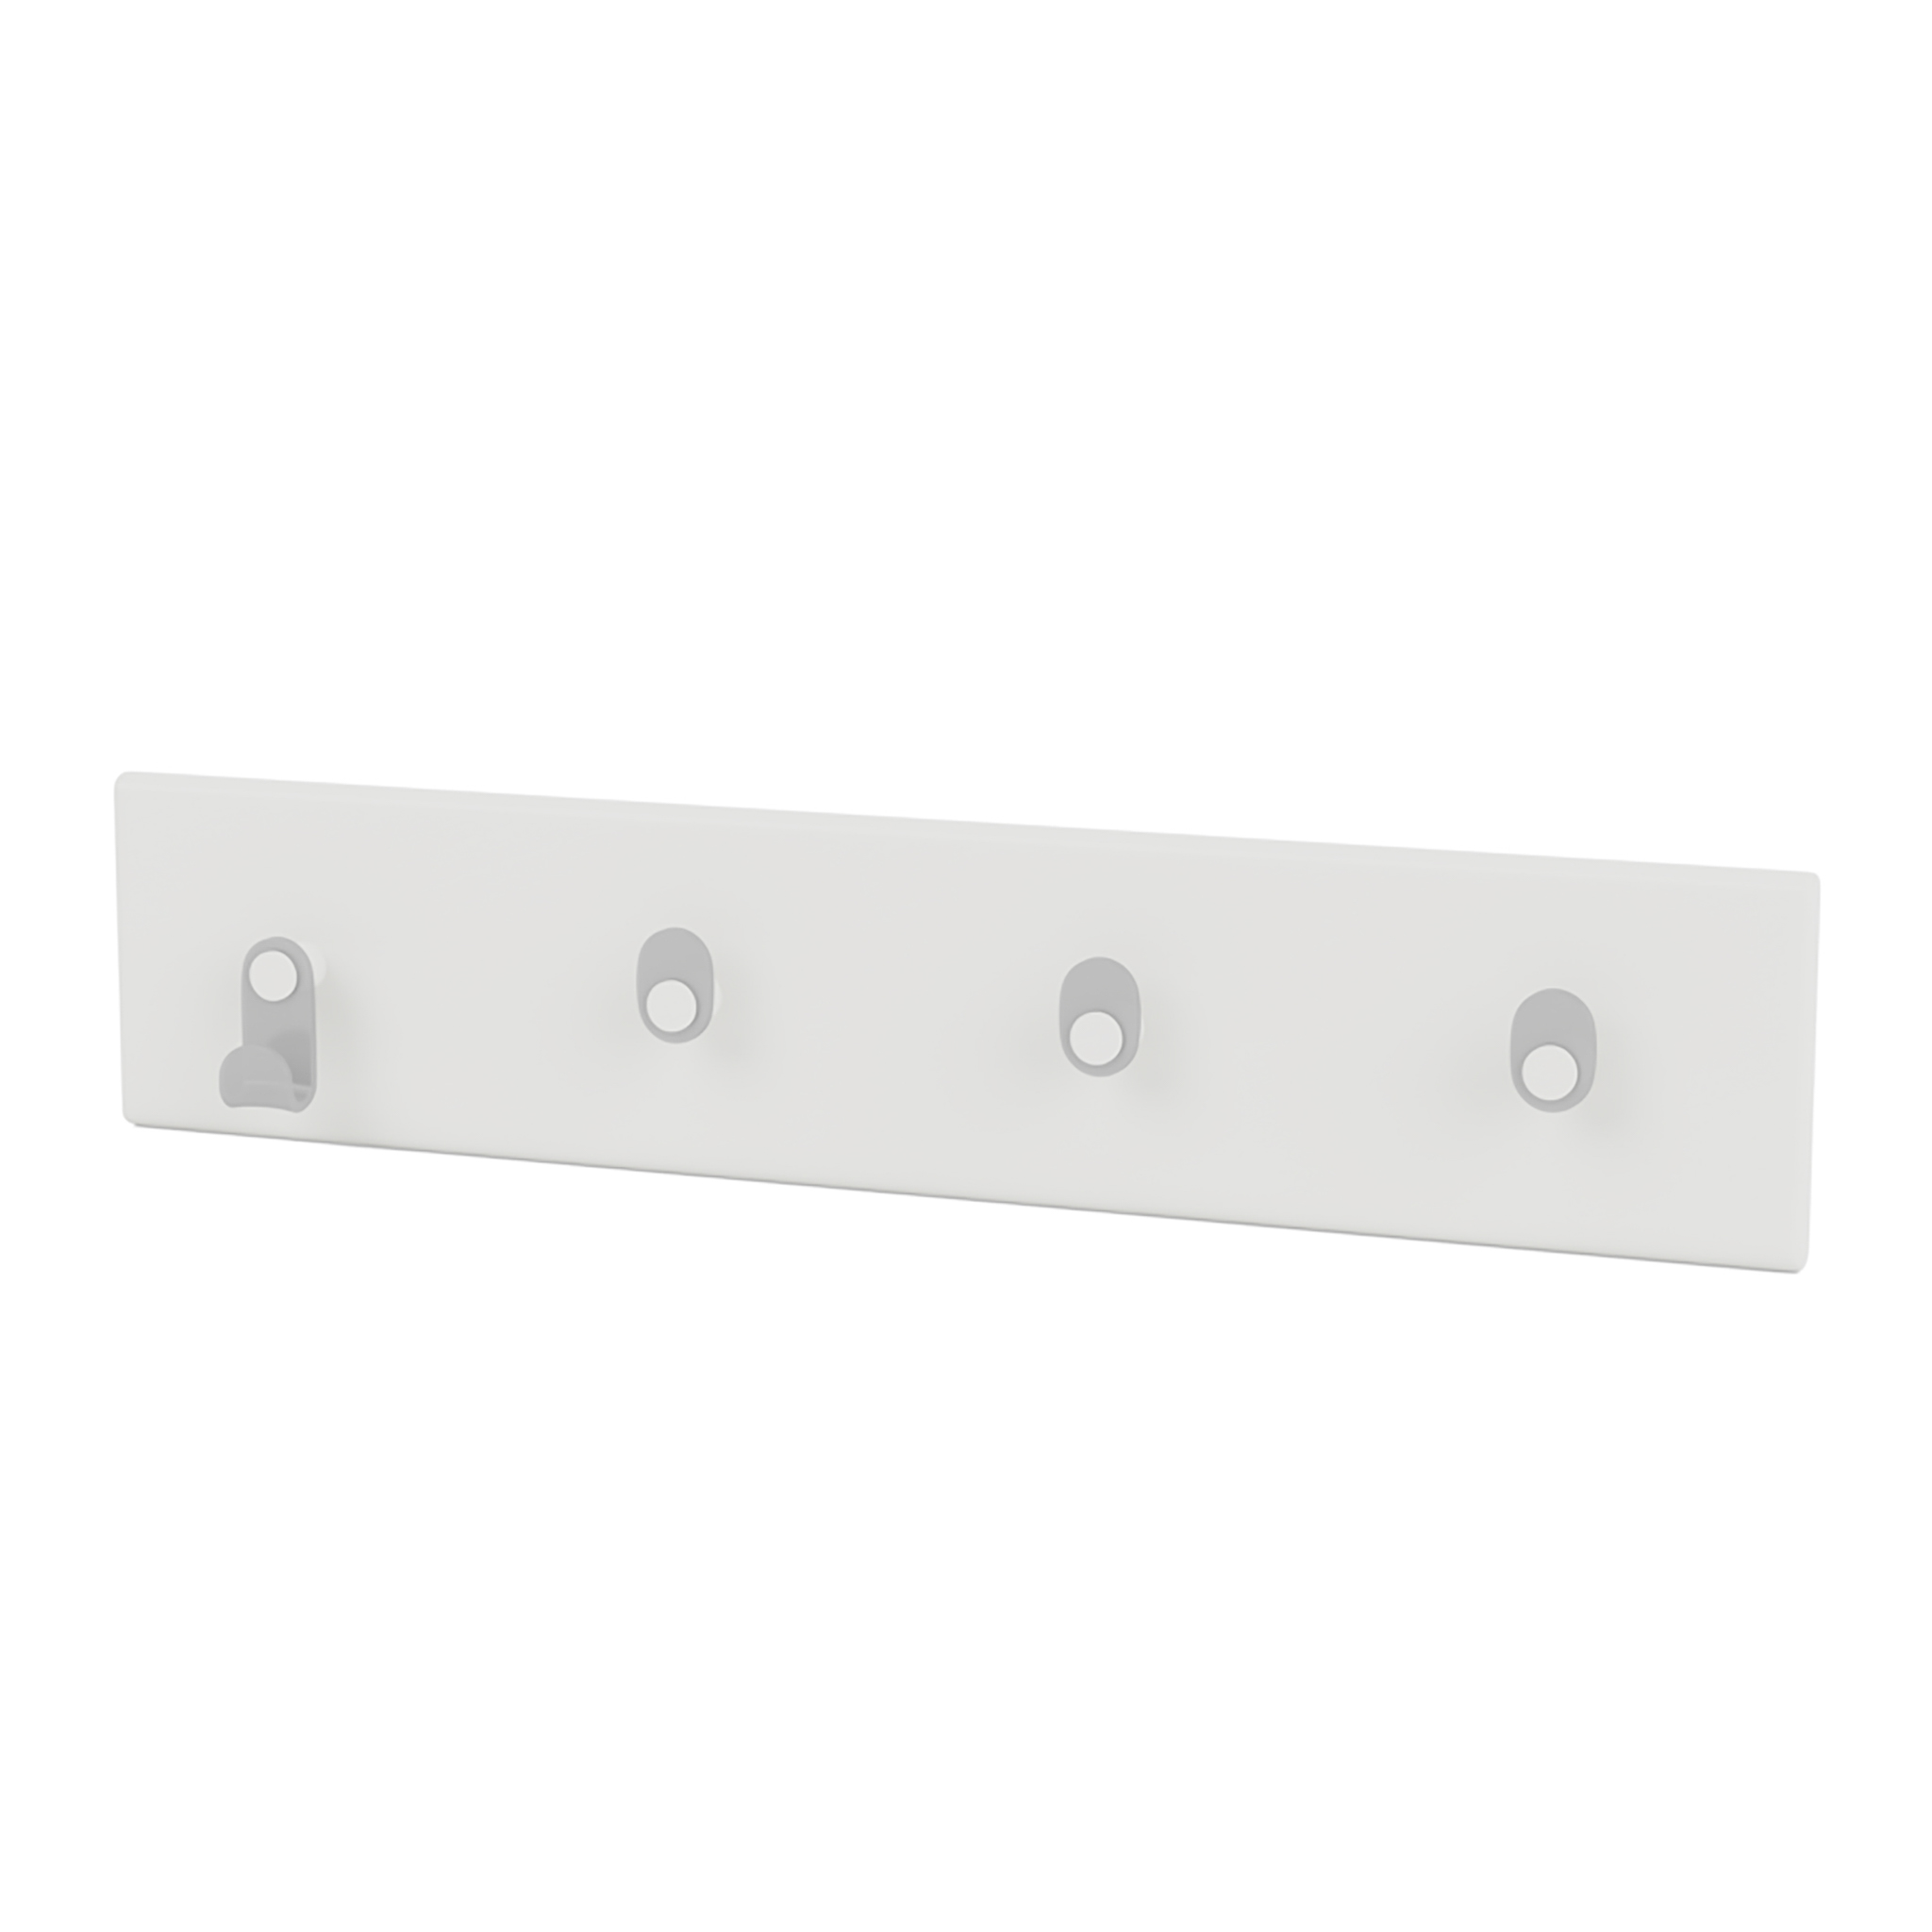 MONTANA // K812 - HOOK RAIL WITH FOUR BUTTONS | 01 WHITE